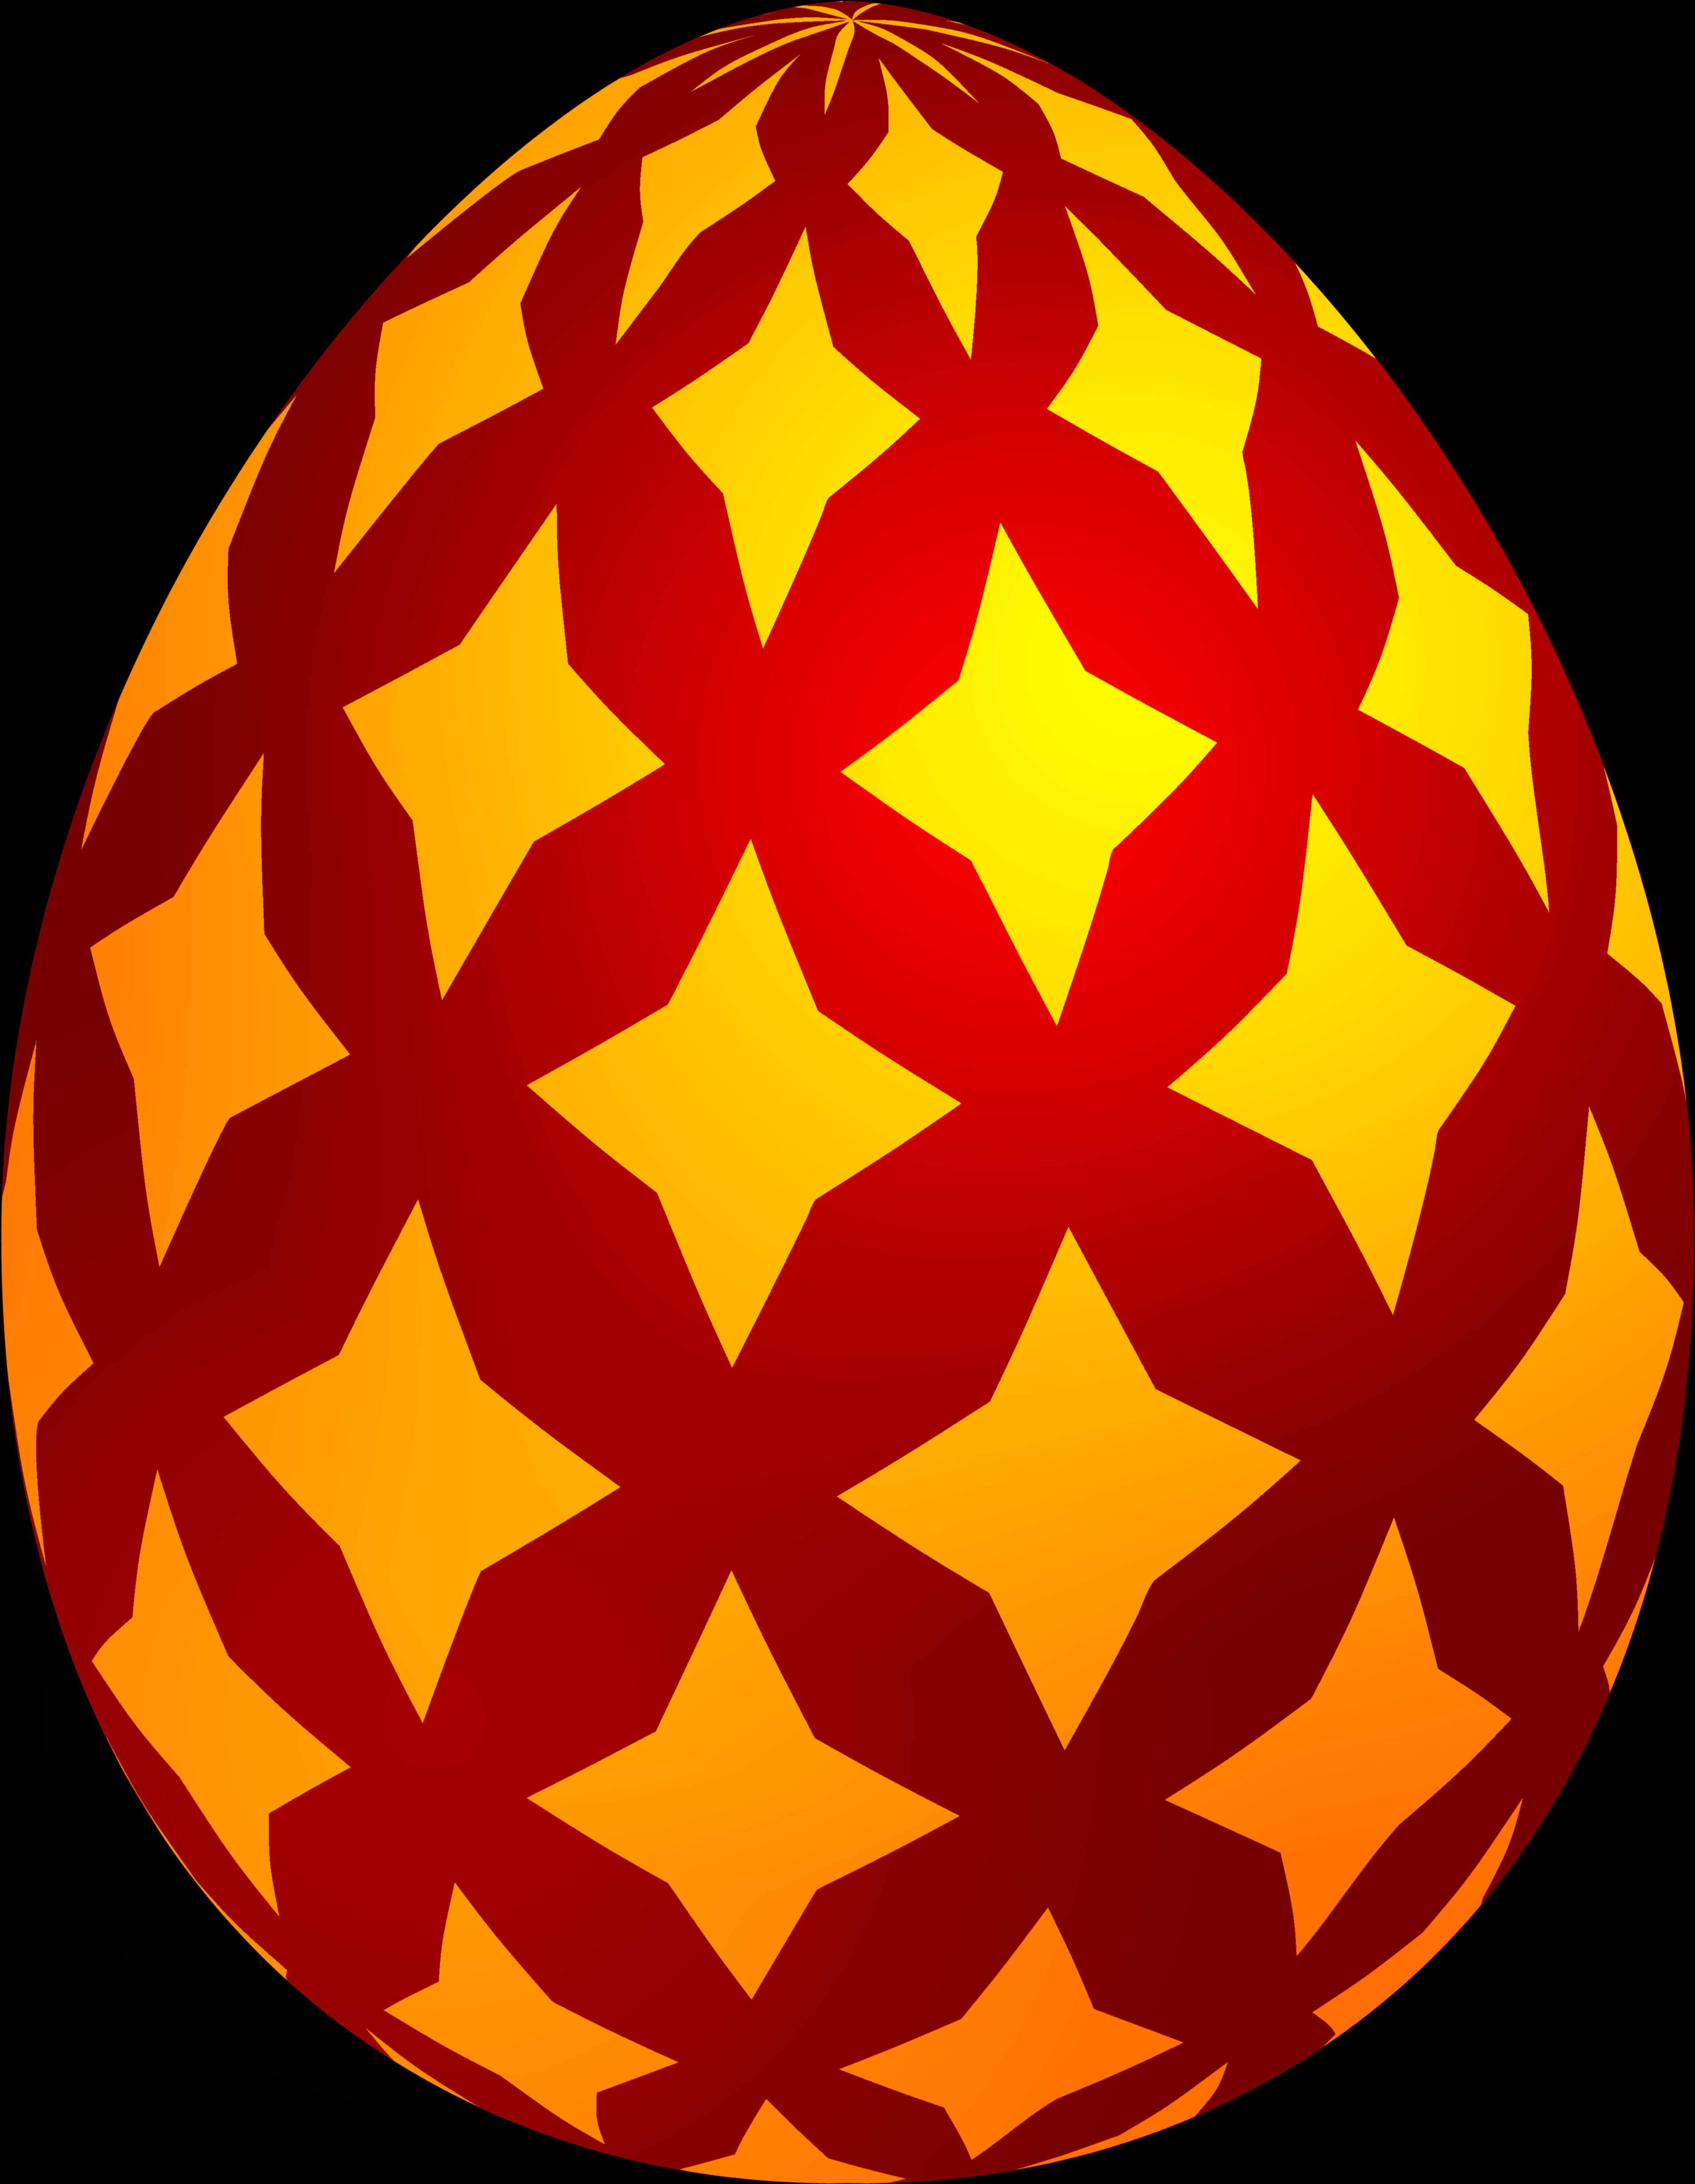 A Red And Yellow Egg With Stars